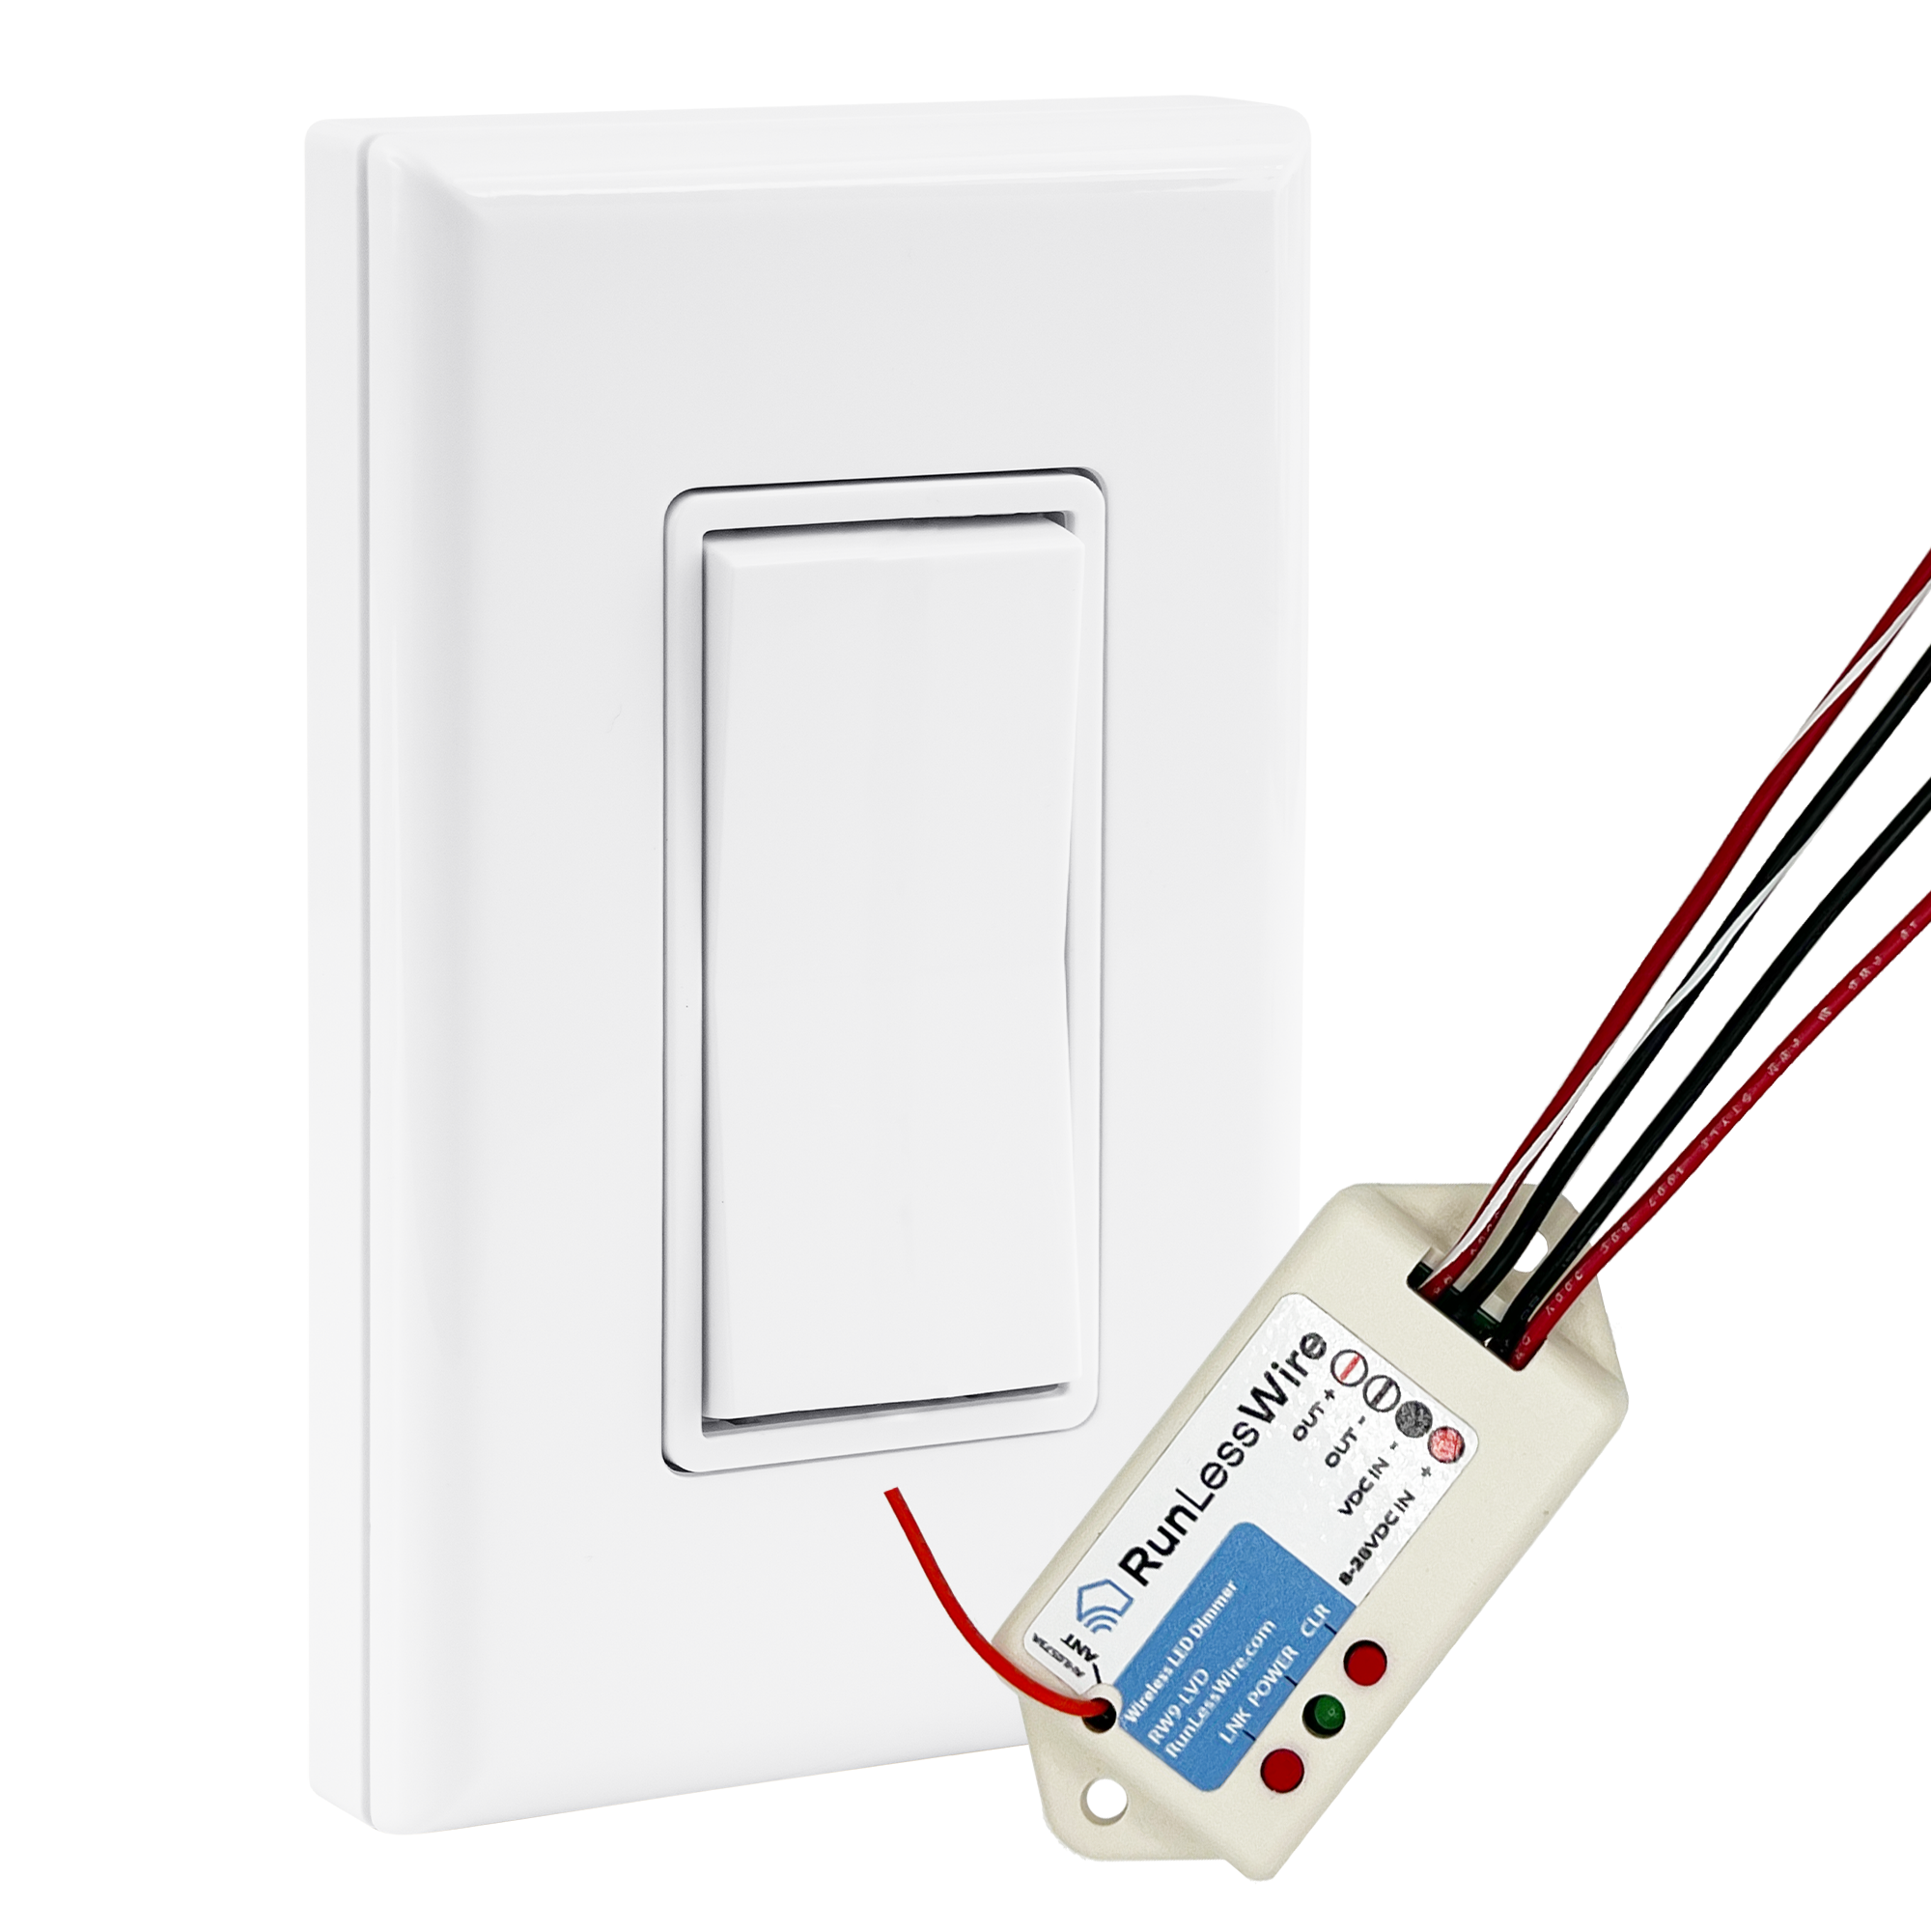 Wireless Light Switch With A Dimming Controller Kit – RunLessWire